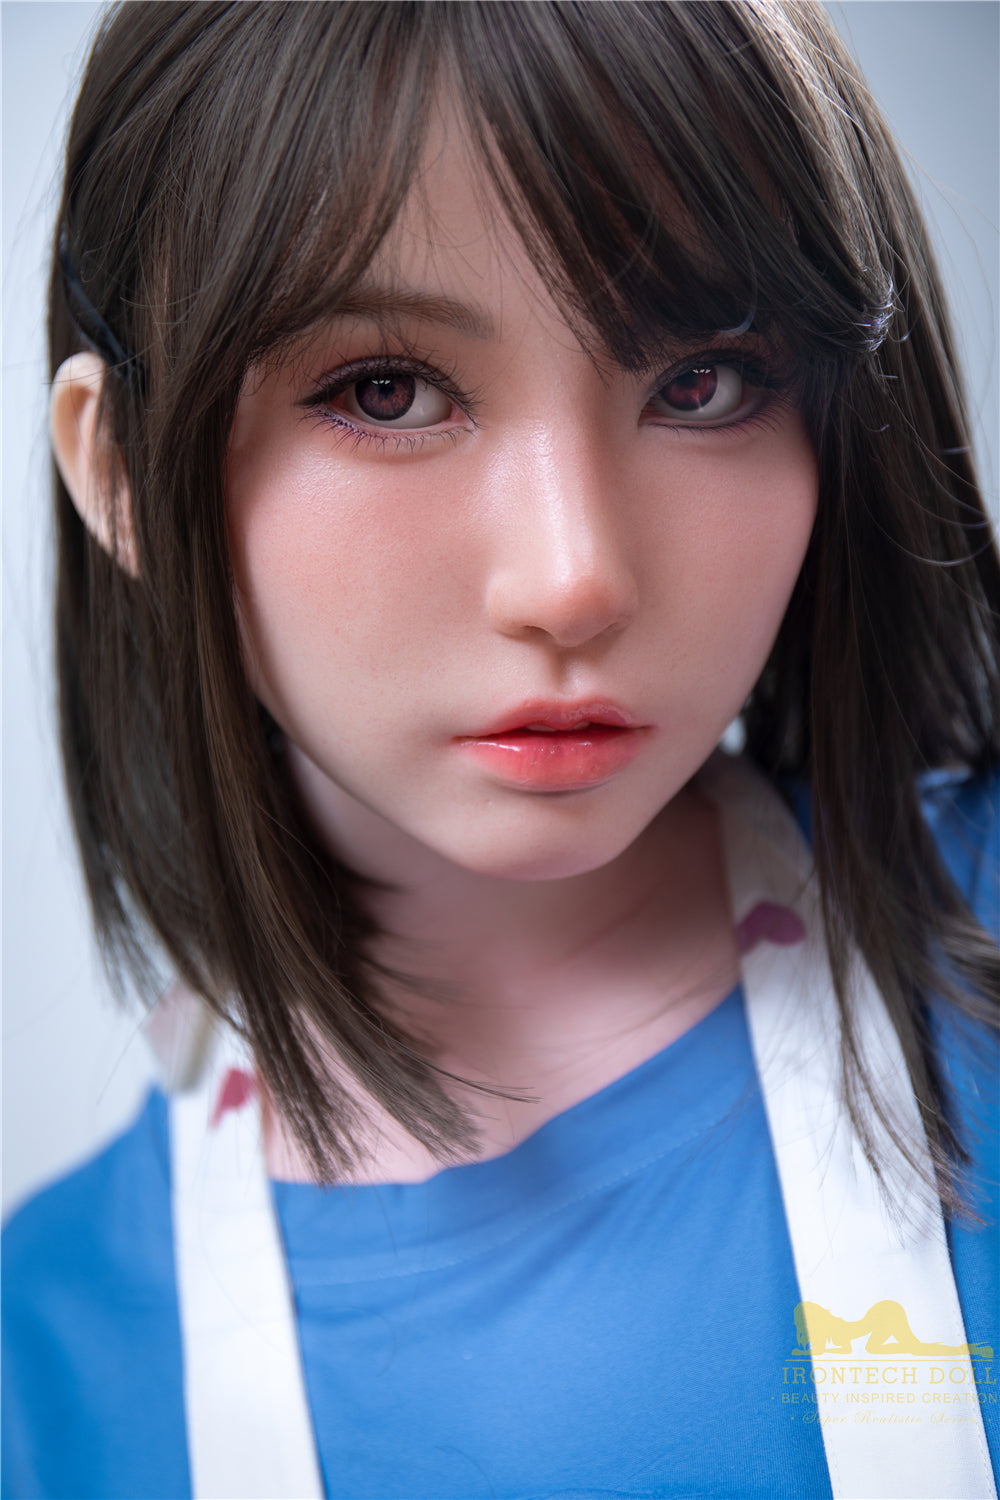 Irontech Doll 164 cm G Silicone - Suki | Buy Sex Dolls at DOLLS ACTUALLY